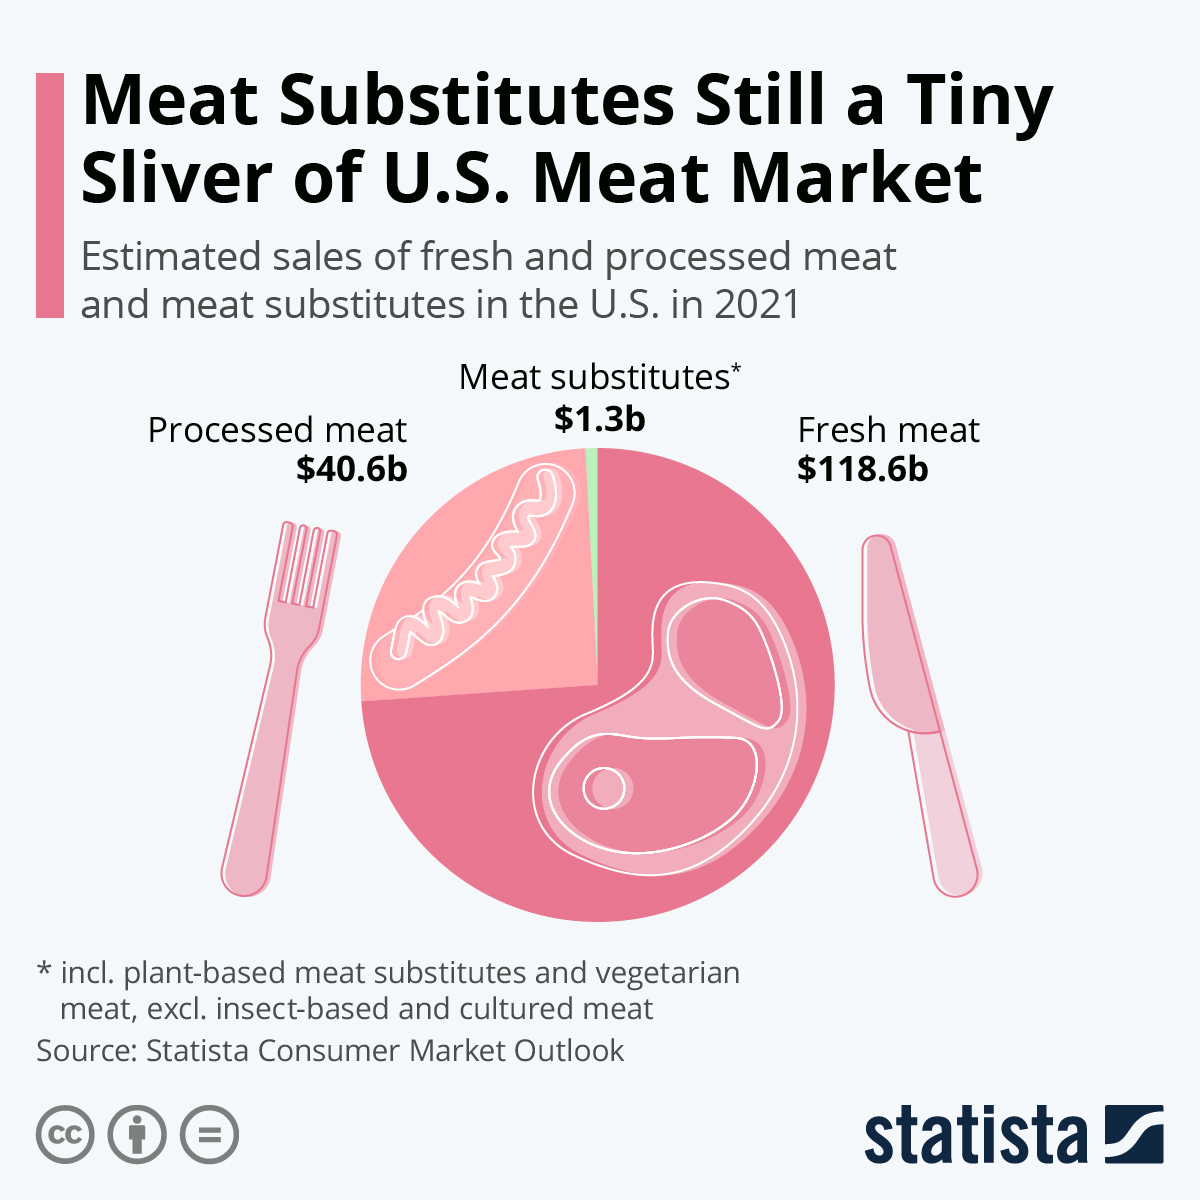 Meat Substitutes Still a Tiny Sliver of U.S. Meat Market